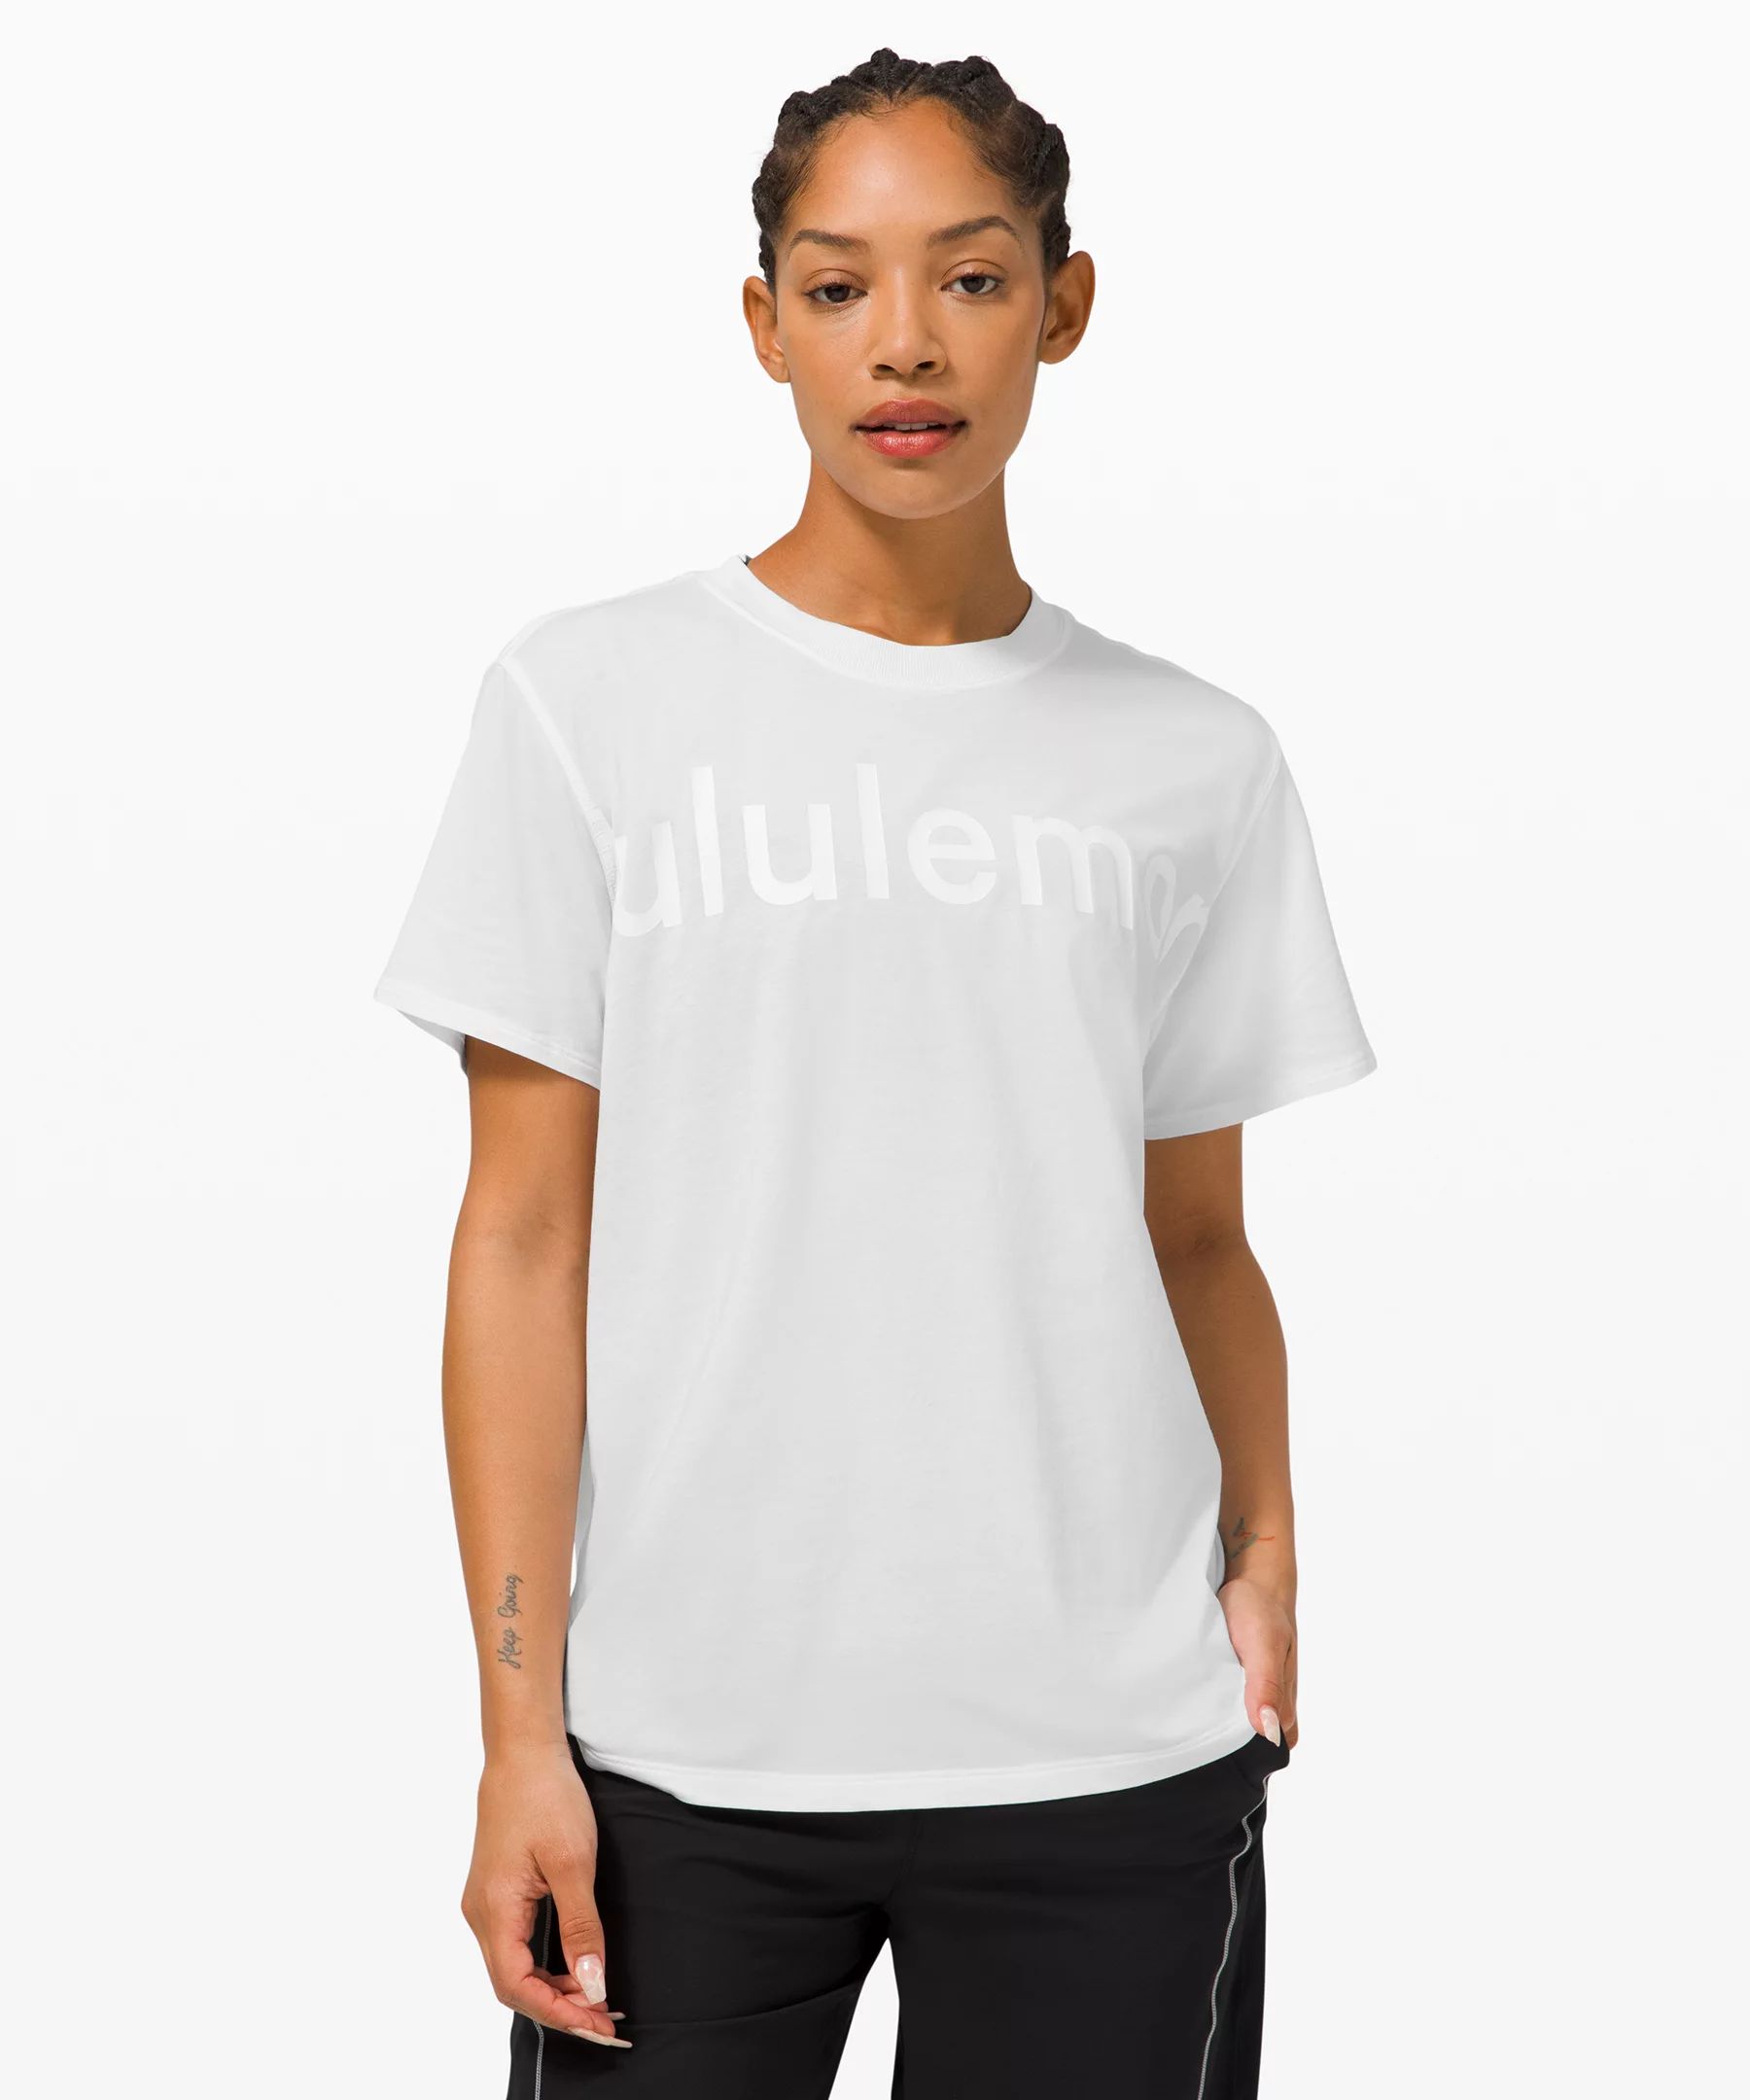 All Yours Tee Graphic | Lululemon (US)